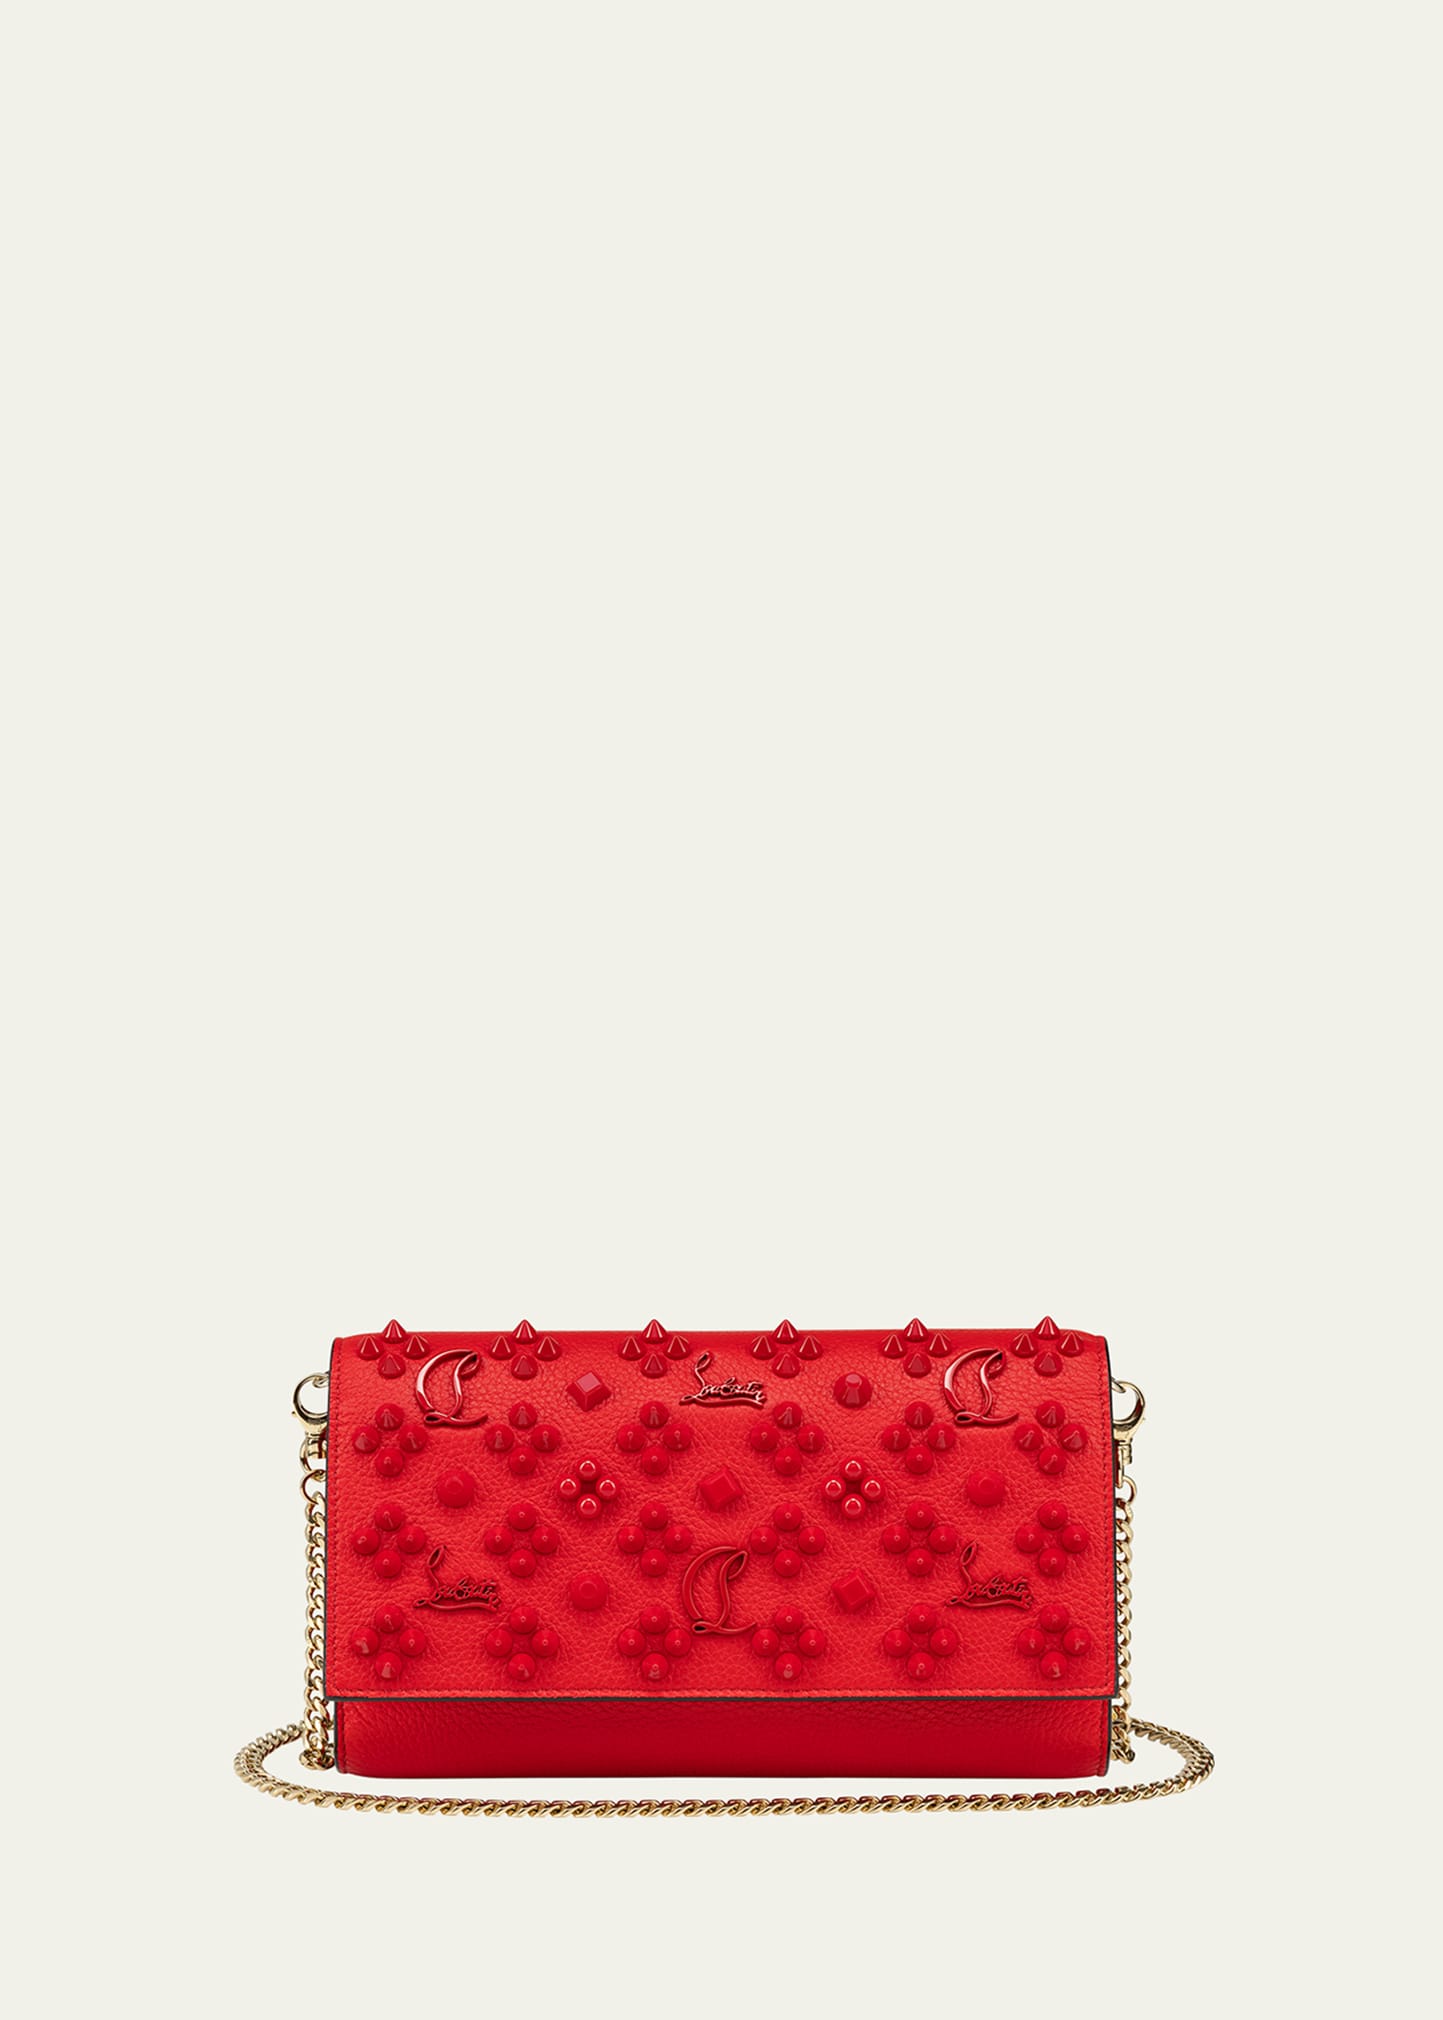 Christian Louboutin Paloma Loubinthesky Spike Wallet On Chain In Red